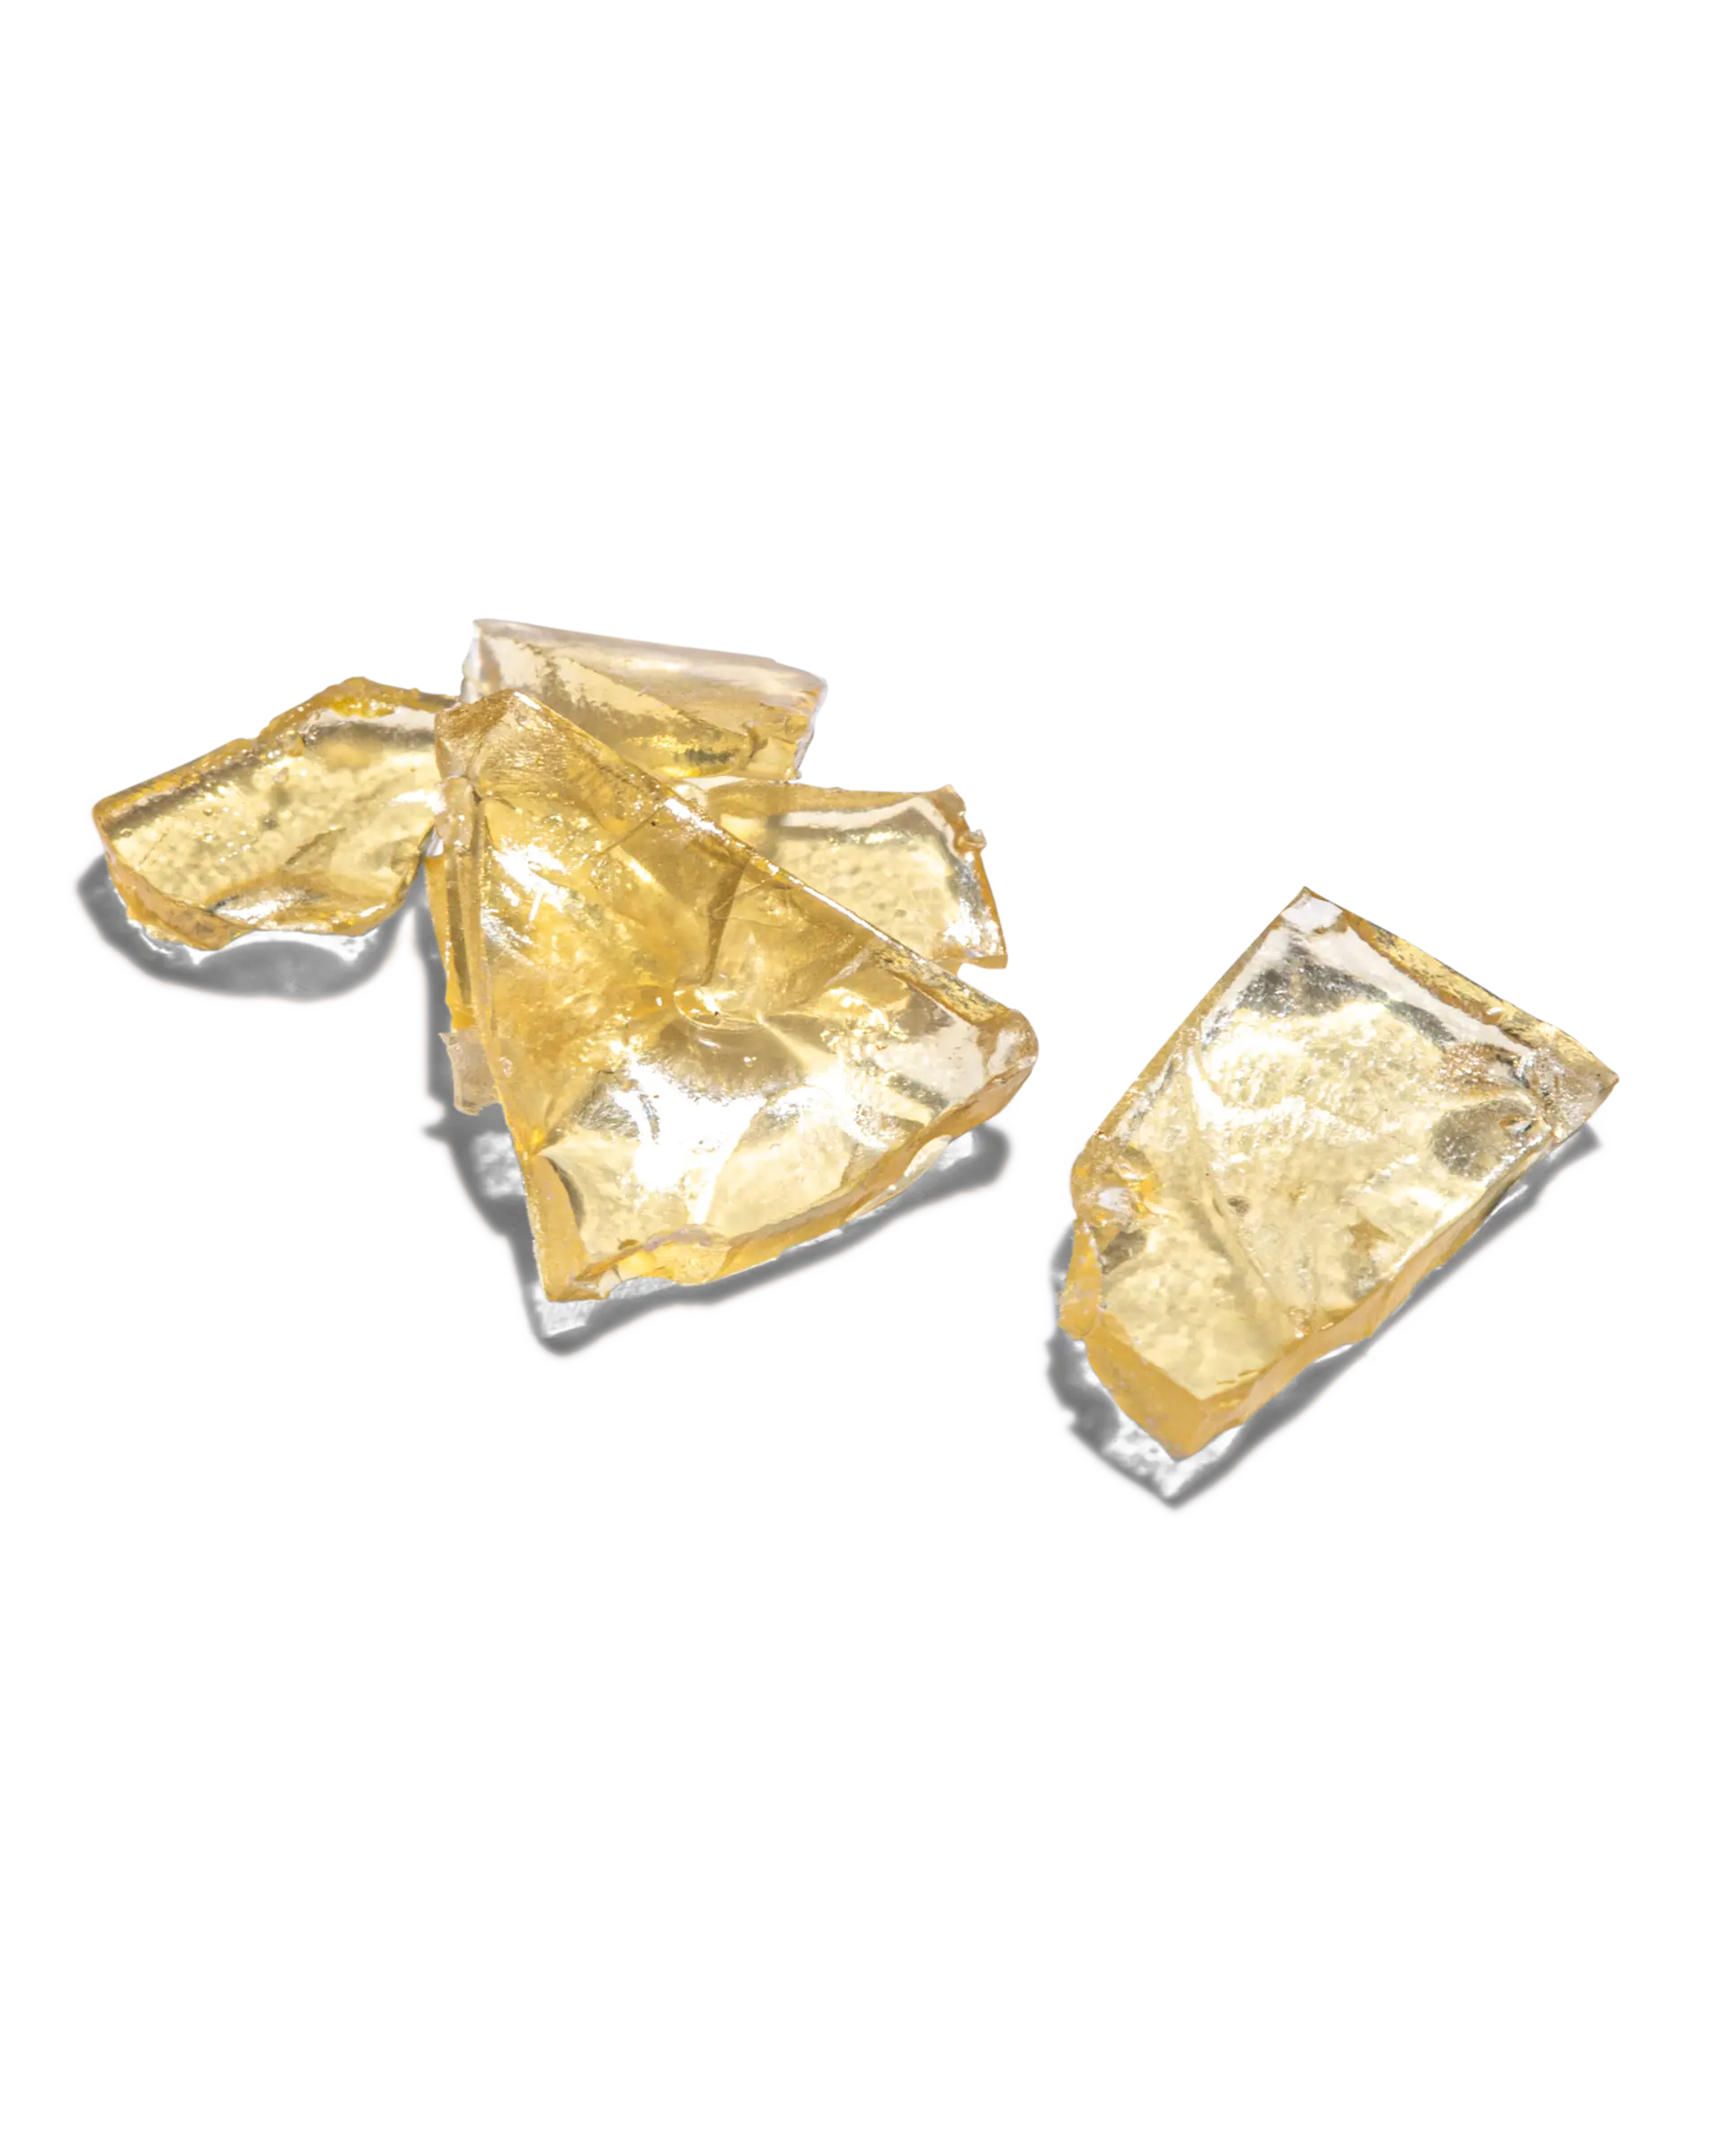 Moroccan Confectionery Shatter 1g, 2 of 2